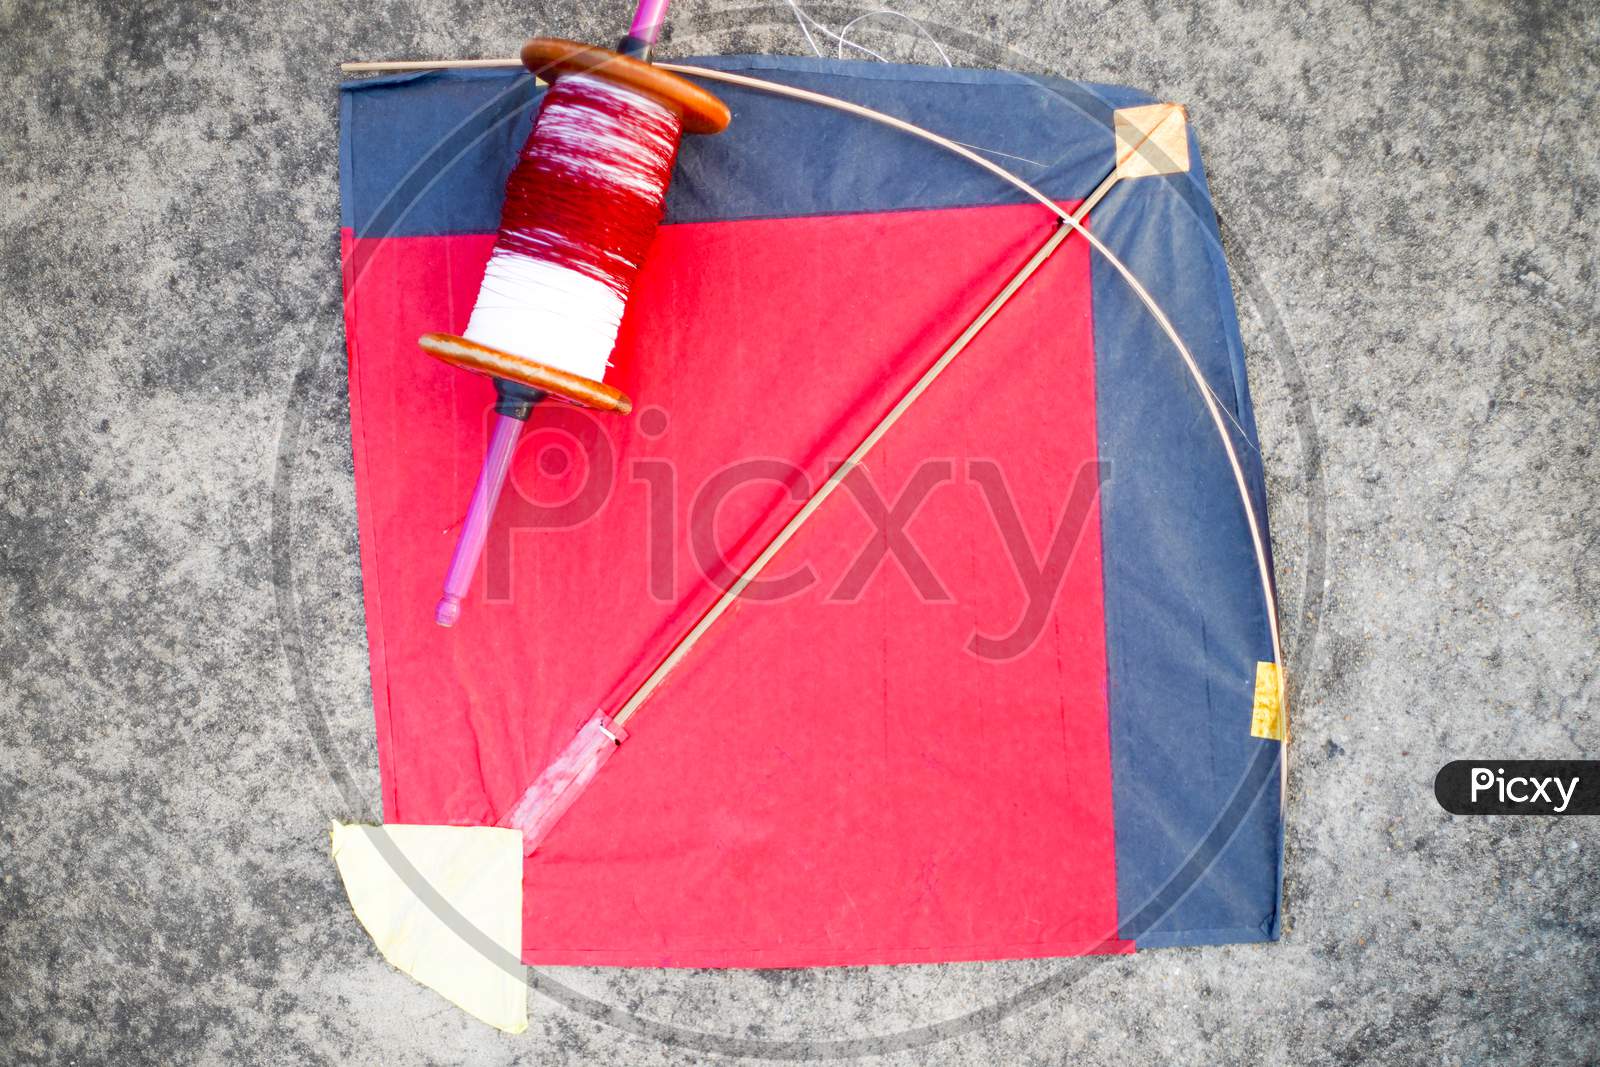 Top Down Flatlay Shot With Red And Black Paper And Wood Kite With A Wooden Handmade Charkhi Thread Spool With Normal And Glass Covered Thread For Kite Fighting On Teh Indian Festival Of Makar Sankranti Uttarayana